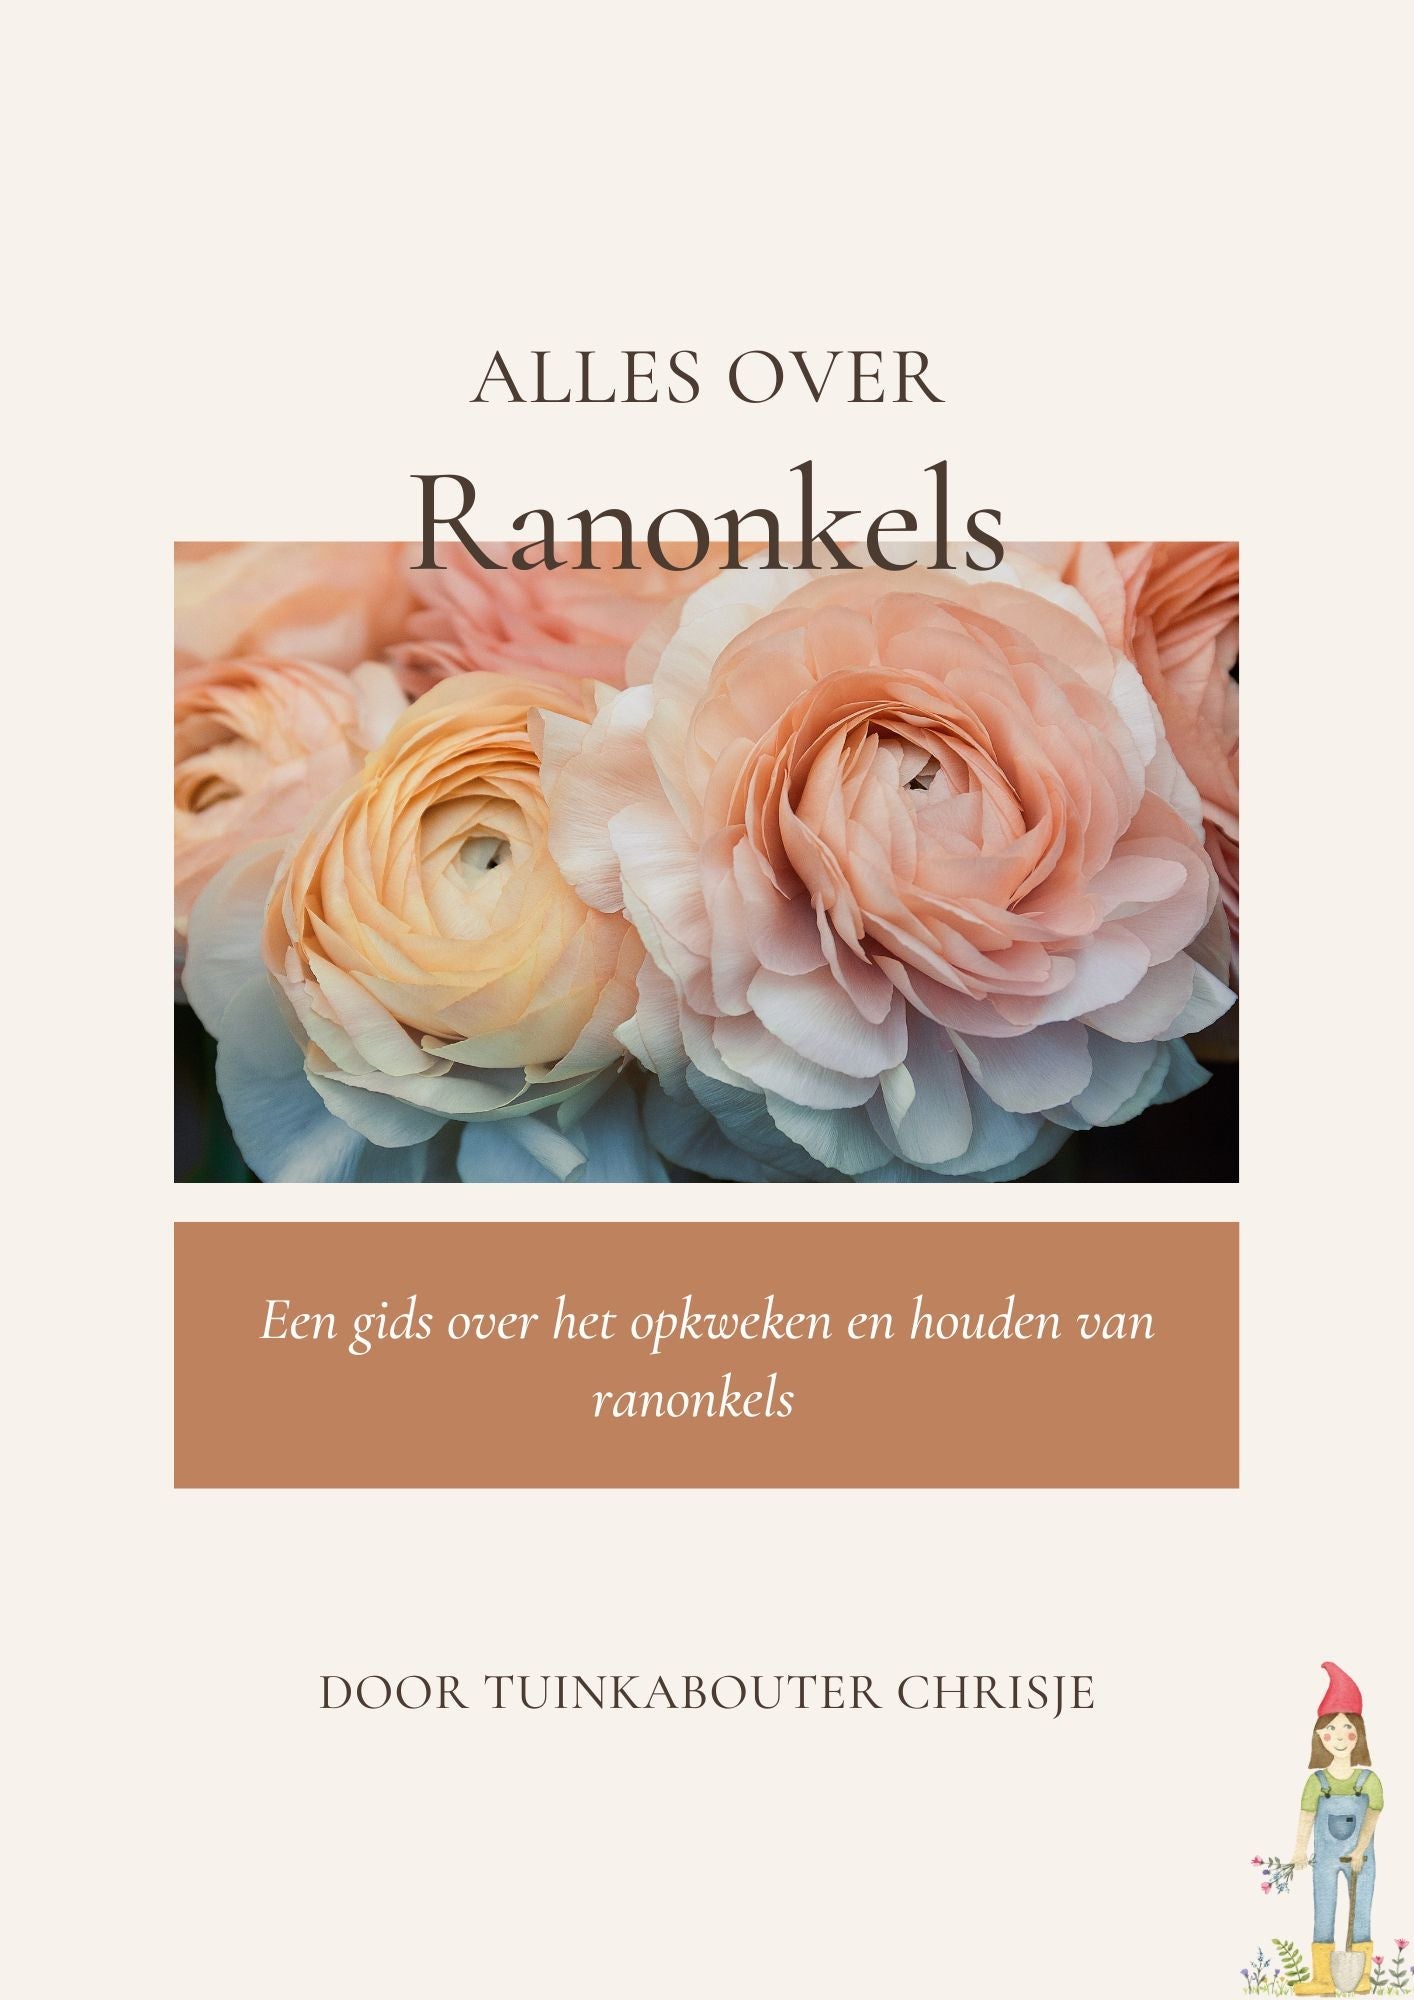 e-book "Alles over ranonkels" * download * - Tuinkabouter Chrisje